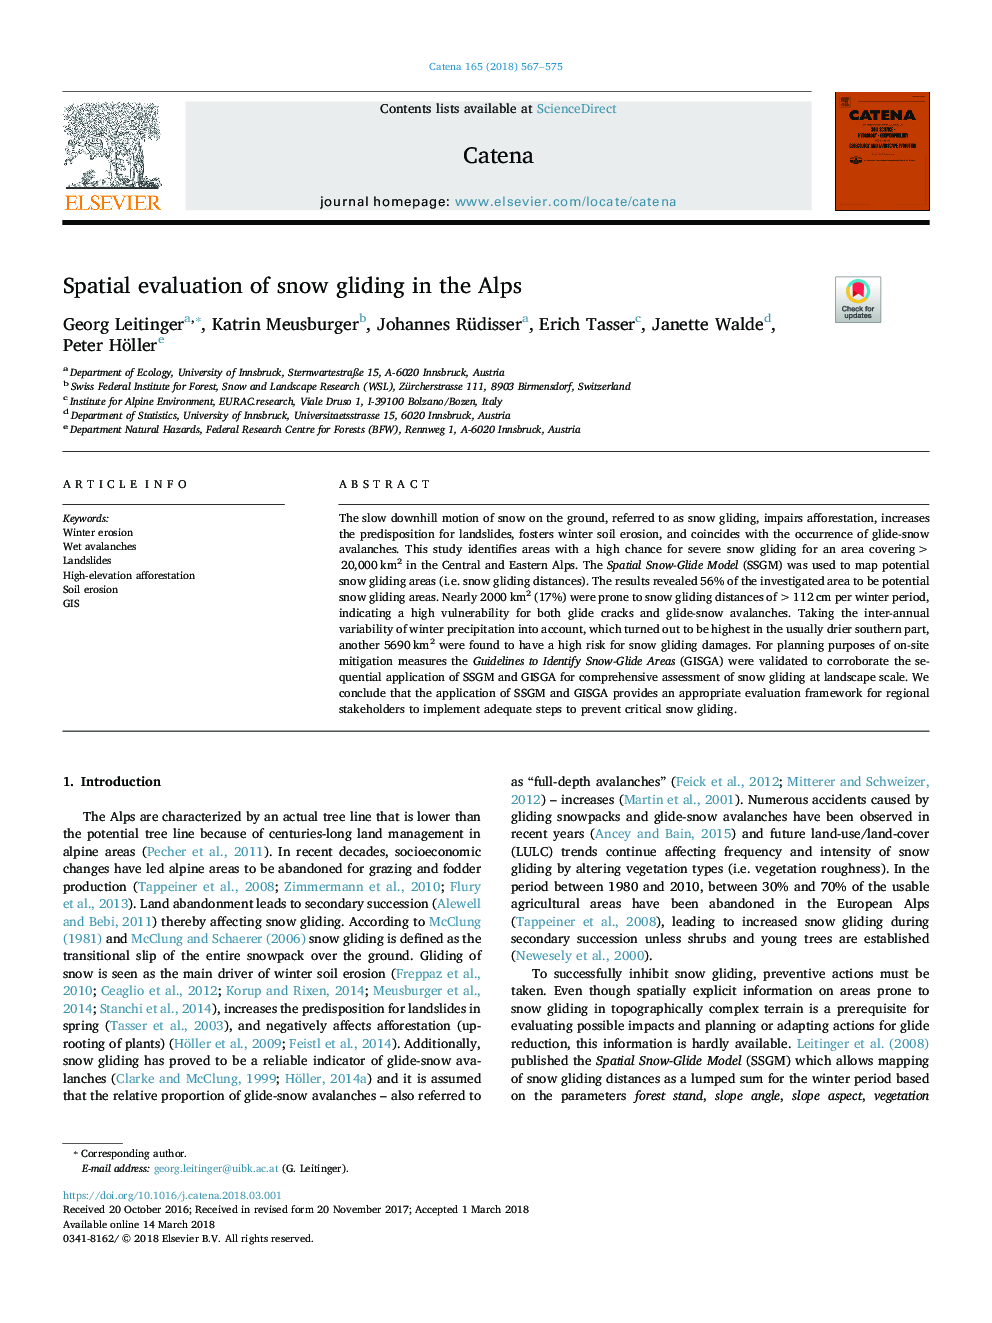 Spatial evaluation of snow gliding in the Alps